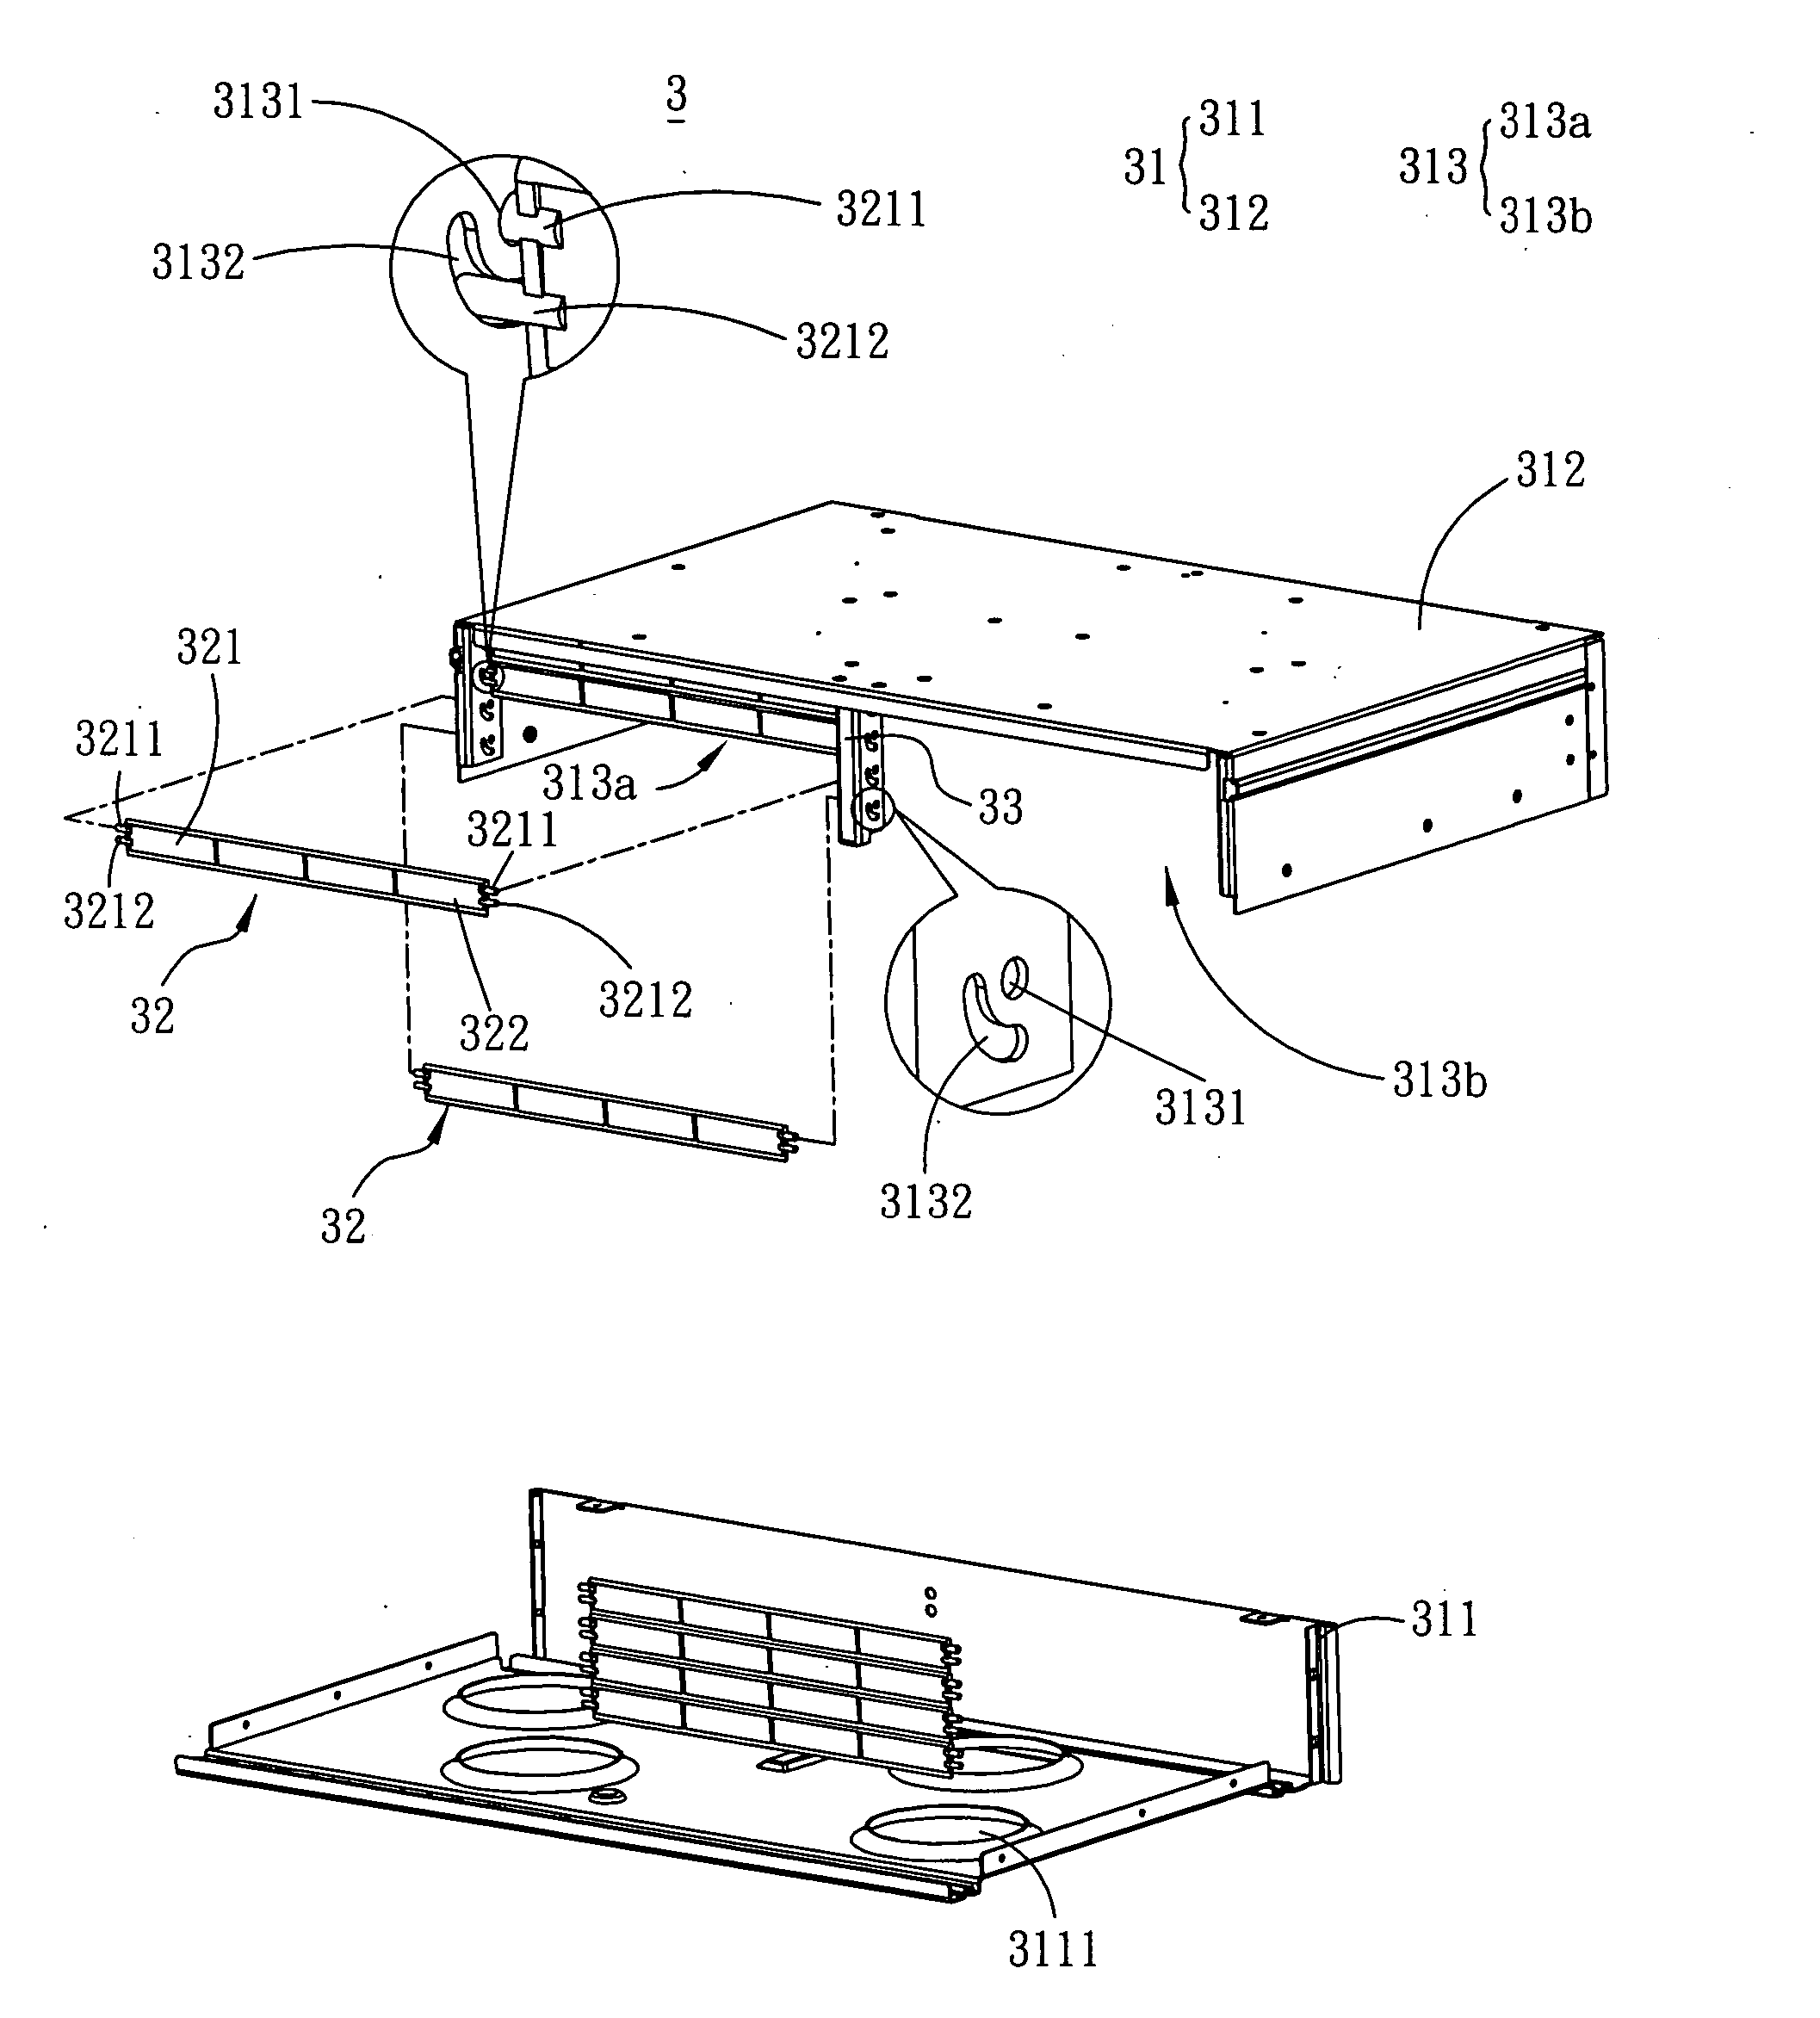 Heat dissipation system and anti-backflow device